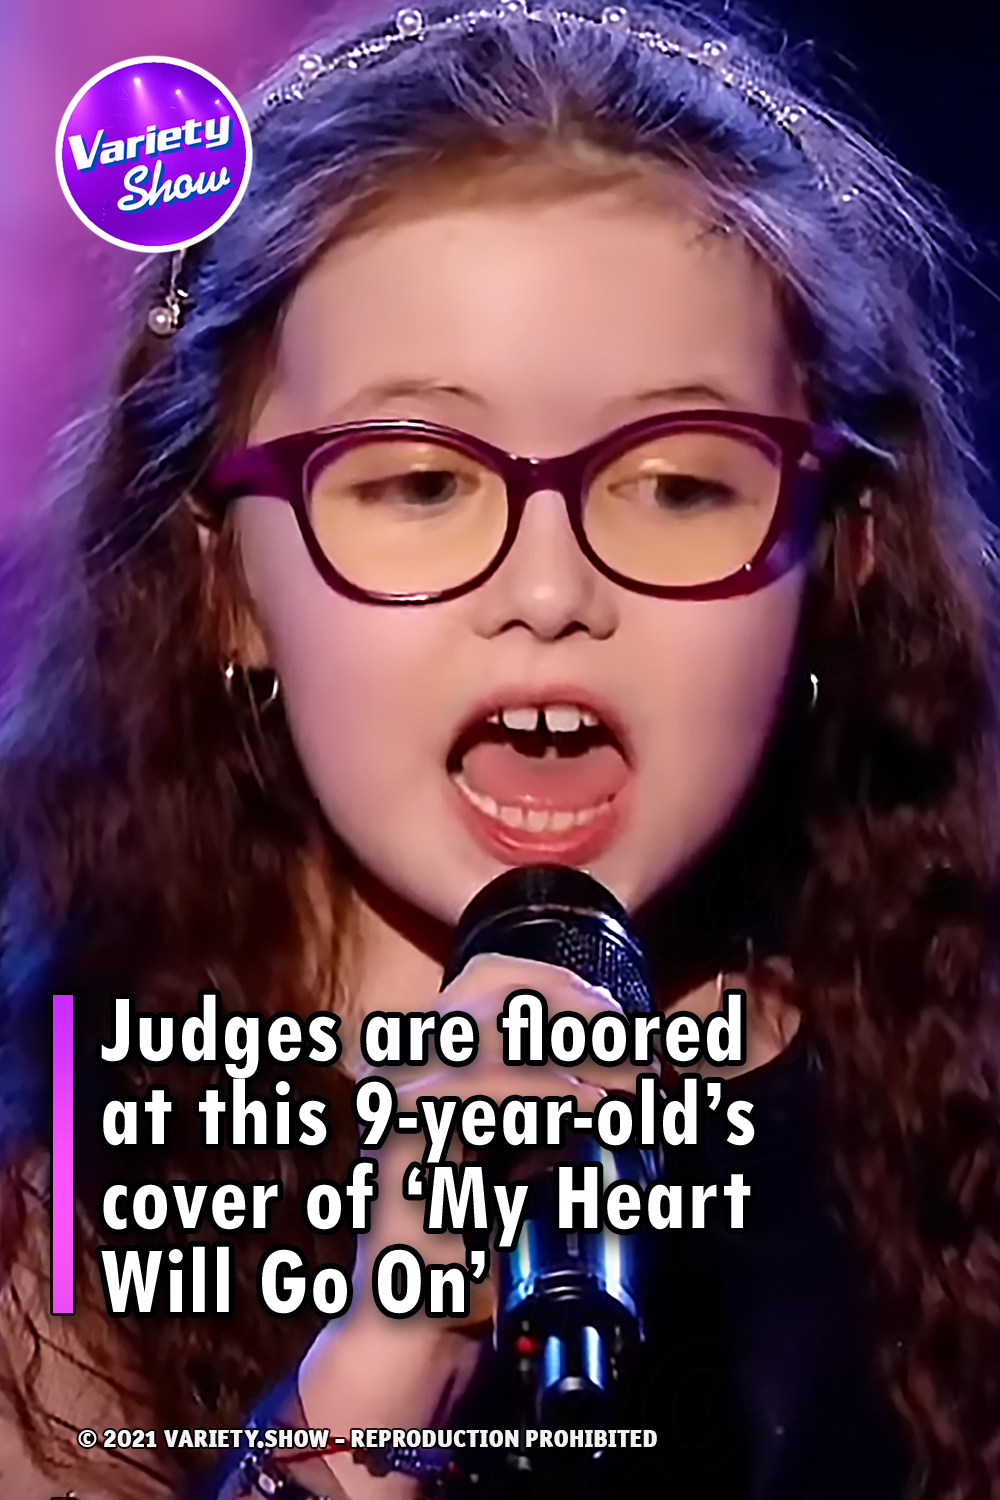 Judges are floored at this 9-year-old’s cover of ‘My Heart Will Go On’